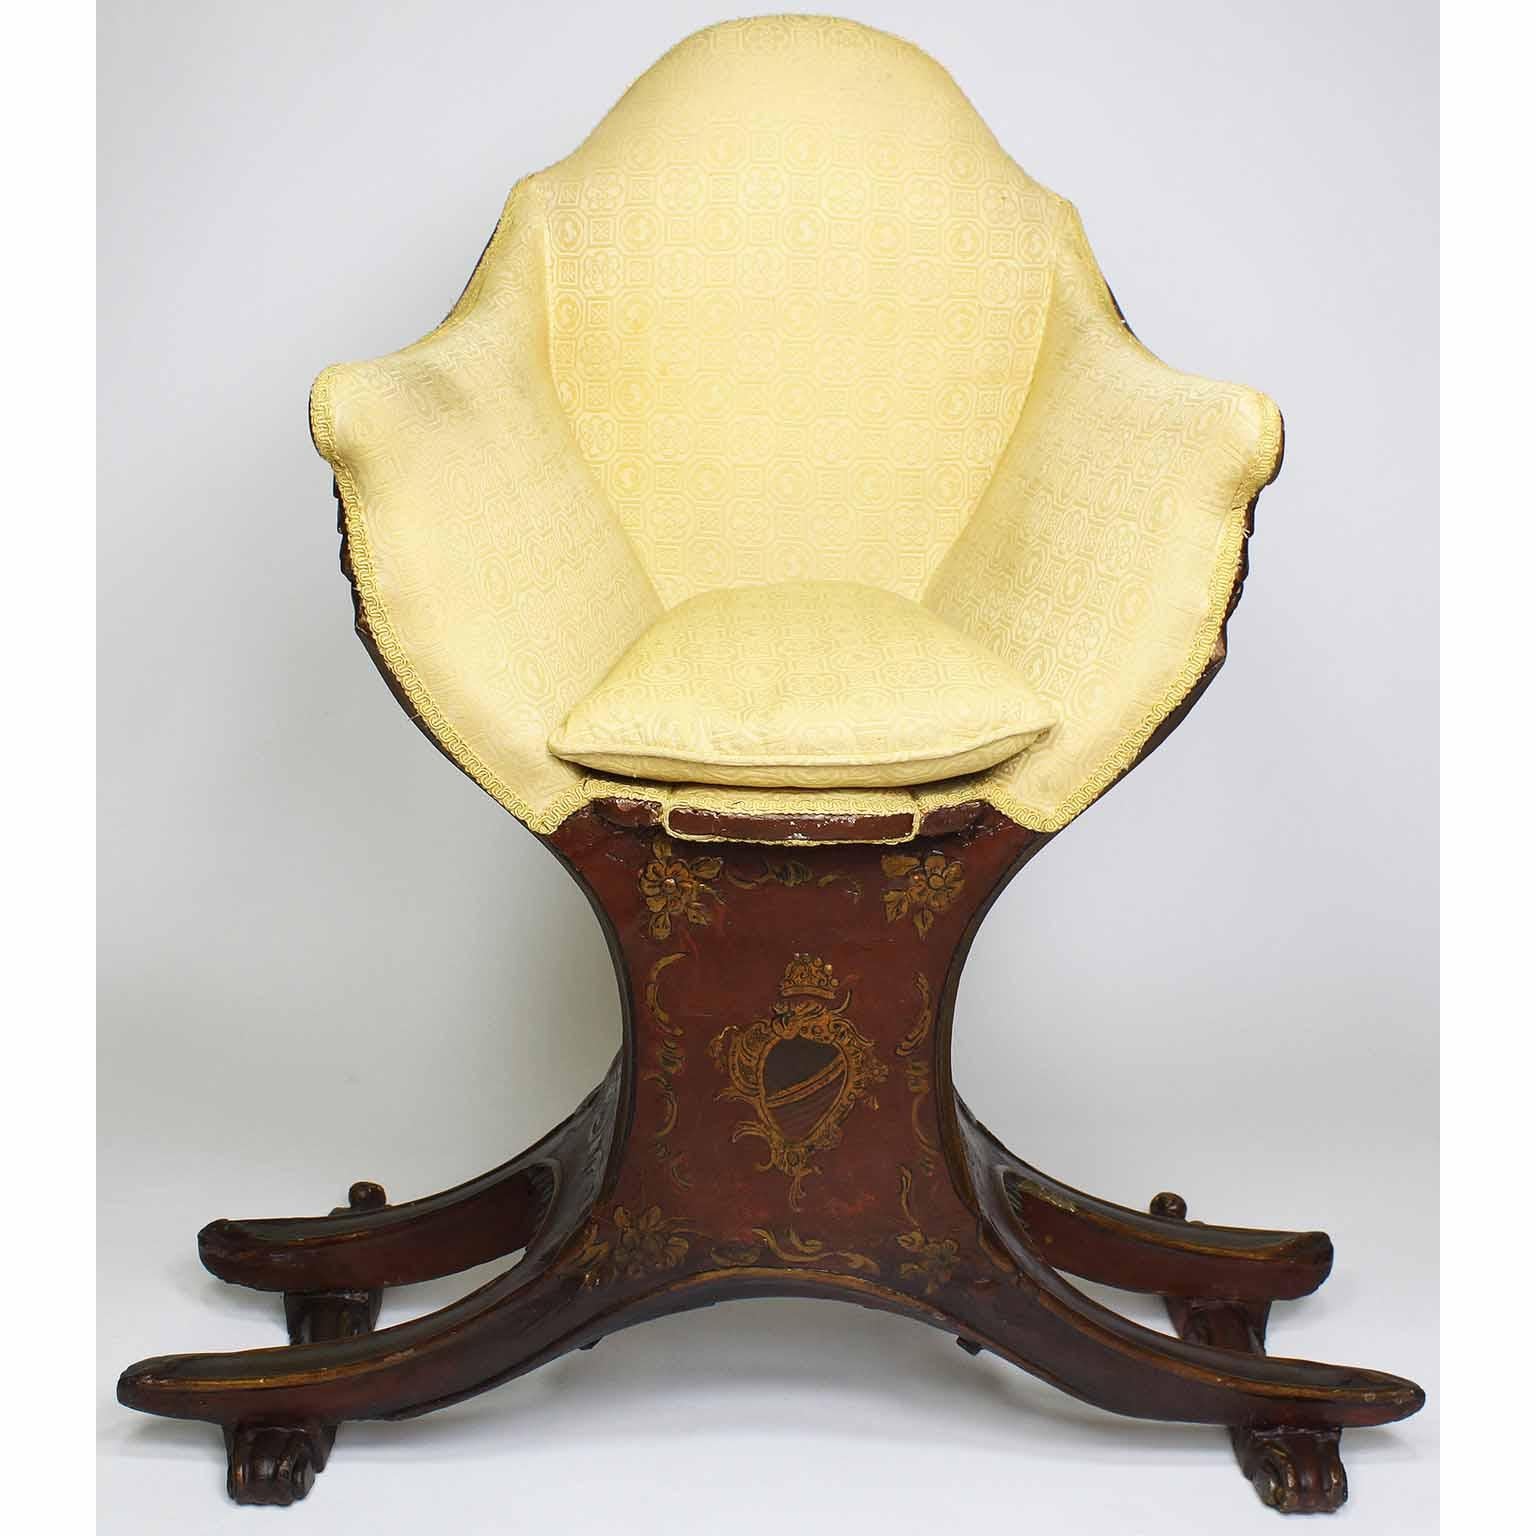 A fine and rare Venetian 18th-19th century Chinoiserie decorated red-lacquer and parcel-gilt Gondola (Gondolieri) chair. The curved sides centred with a pillow seat and padded back and sides, decorated with parcel-gilt scrolls and acanthus with